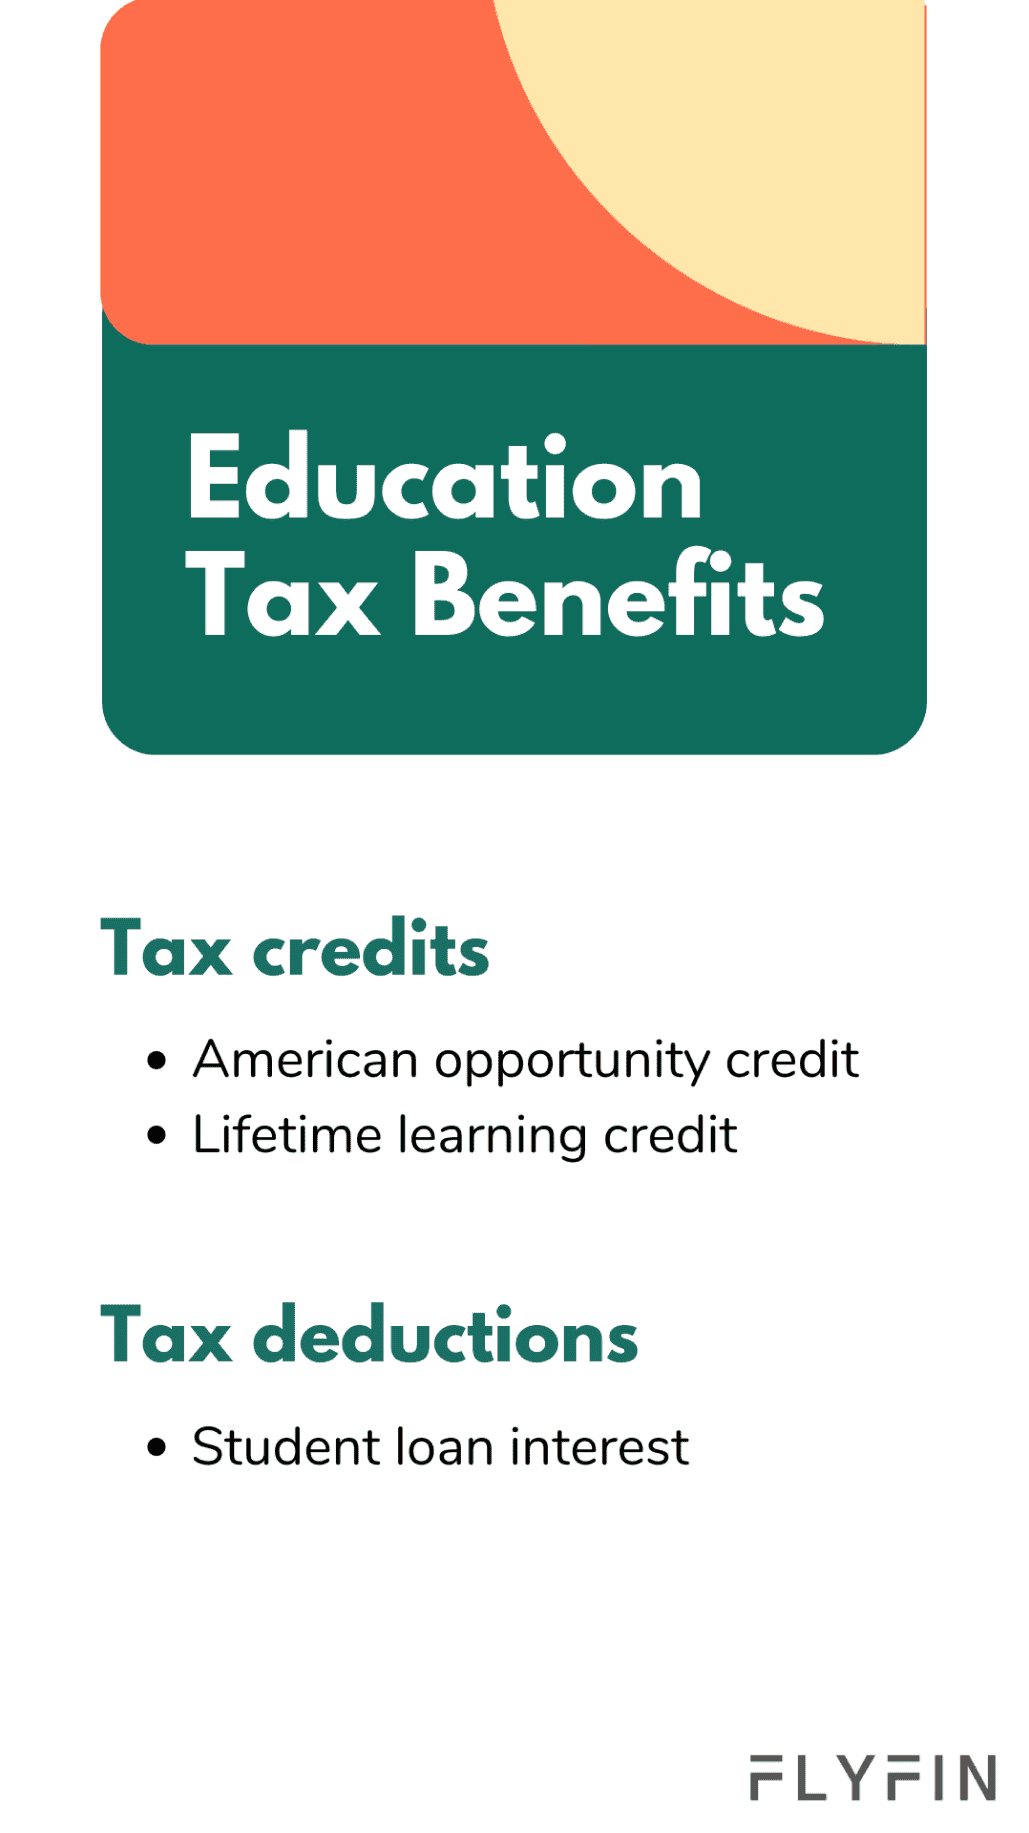 Image showing tax benefits related to education including American opportunity credit, lifetime learning credit, and student loan interest. No mention of self employed, 1099, freelancer, or taxes.